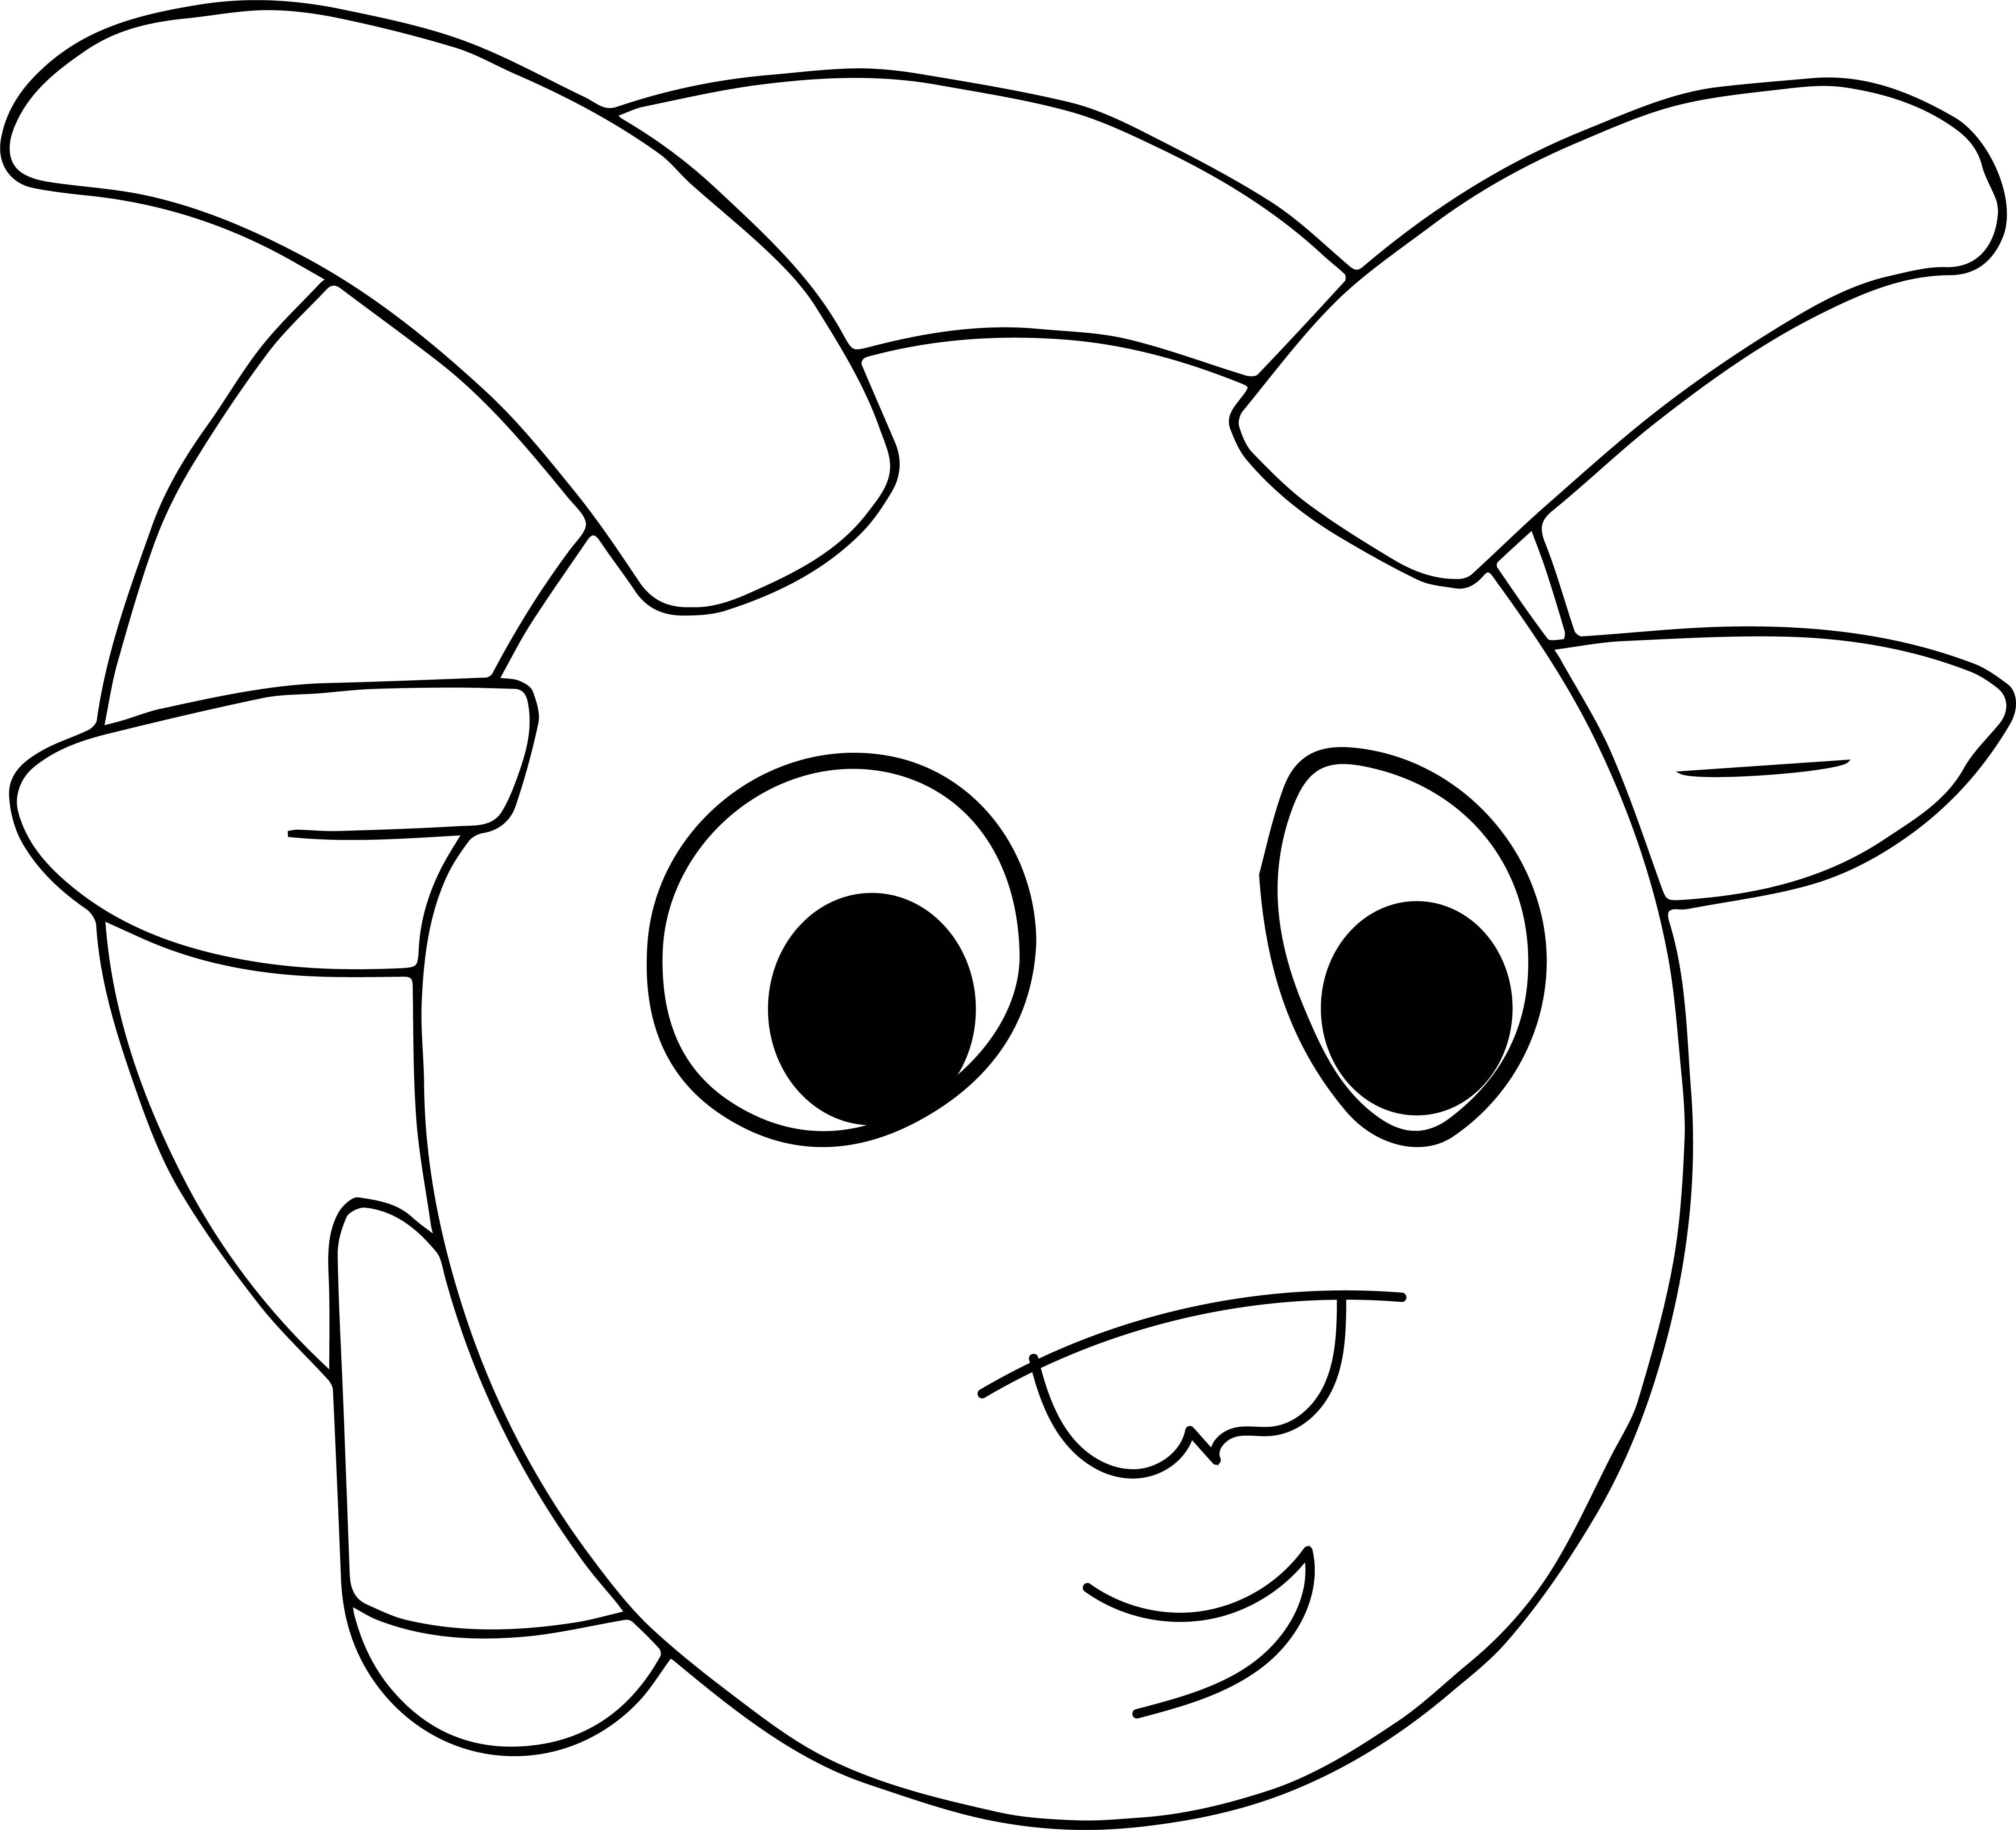 Ram Coloring Page at GetColorings.com | Free printable colorings pages